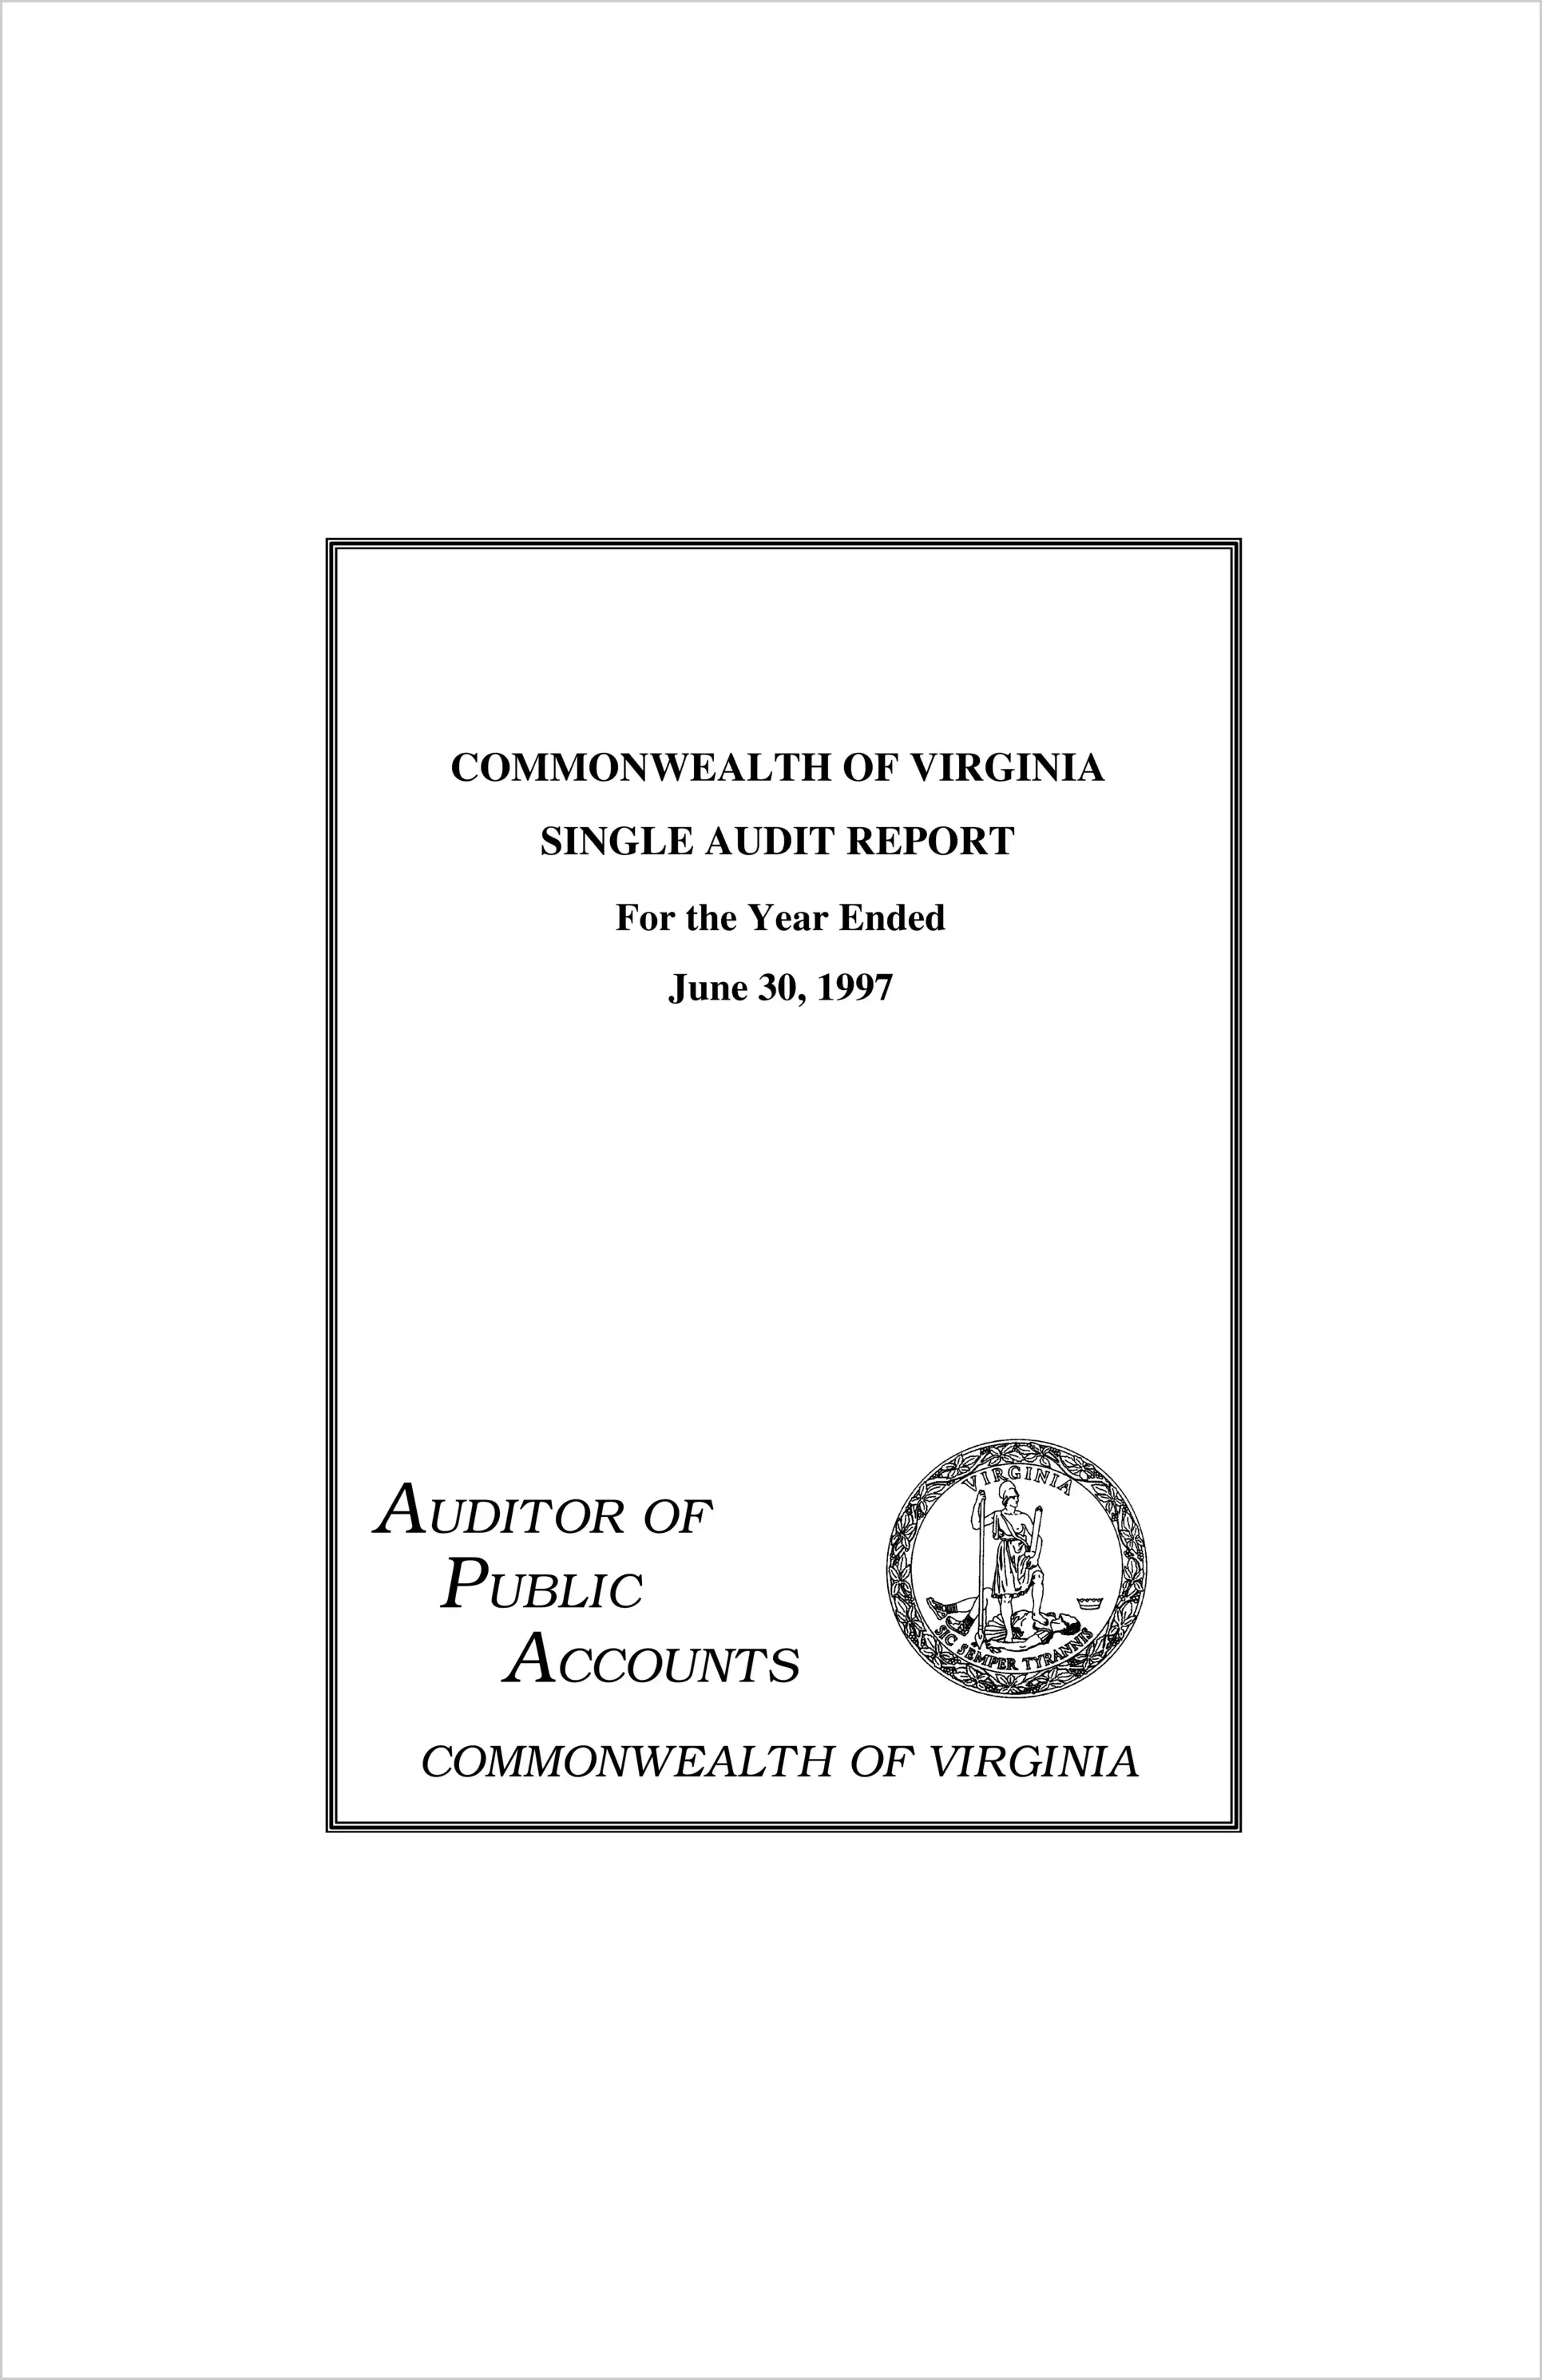 Commonwealth of Virginia Single Audit Report for the Year Ended June 30, 1997